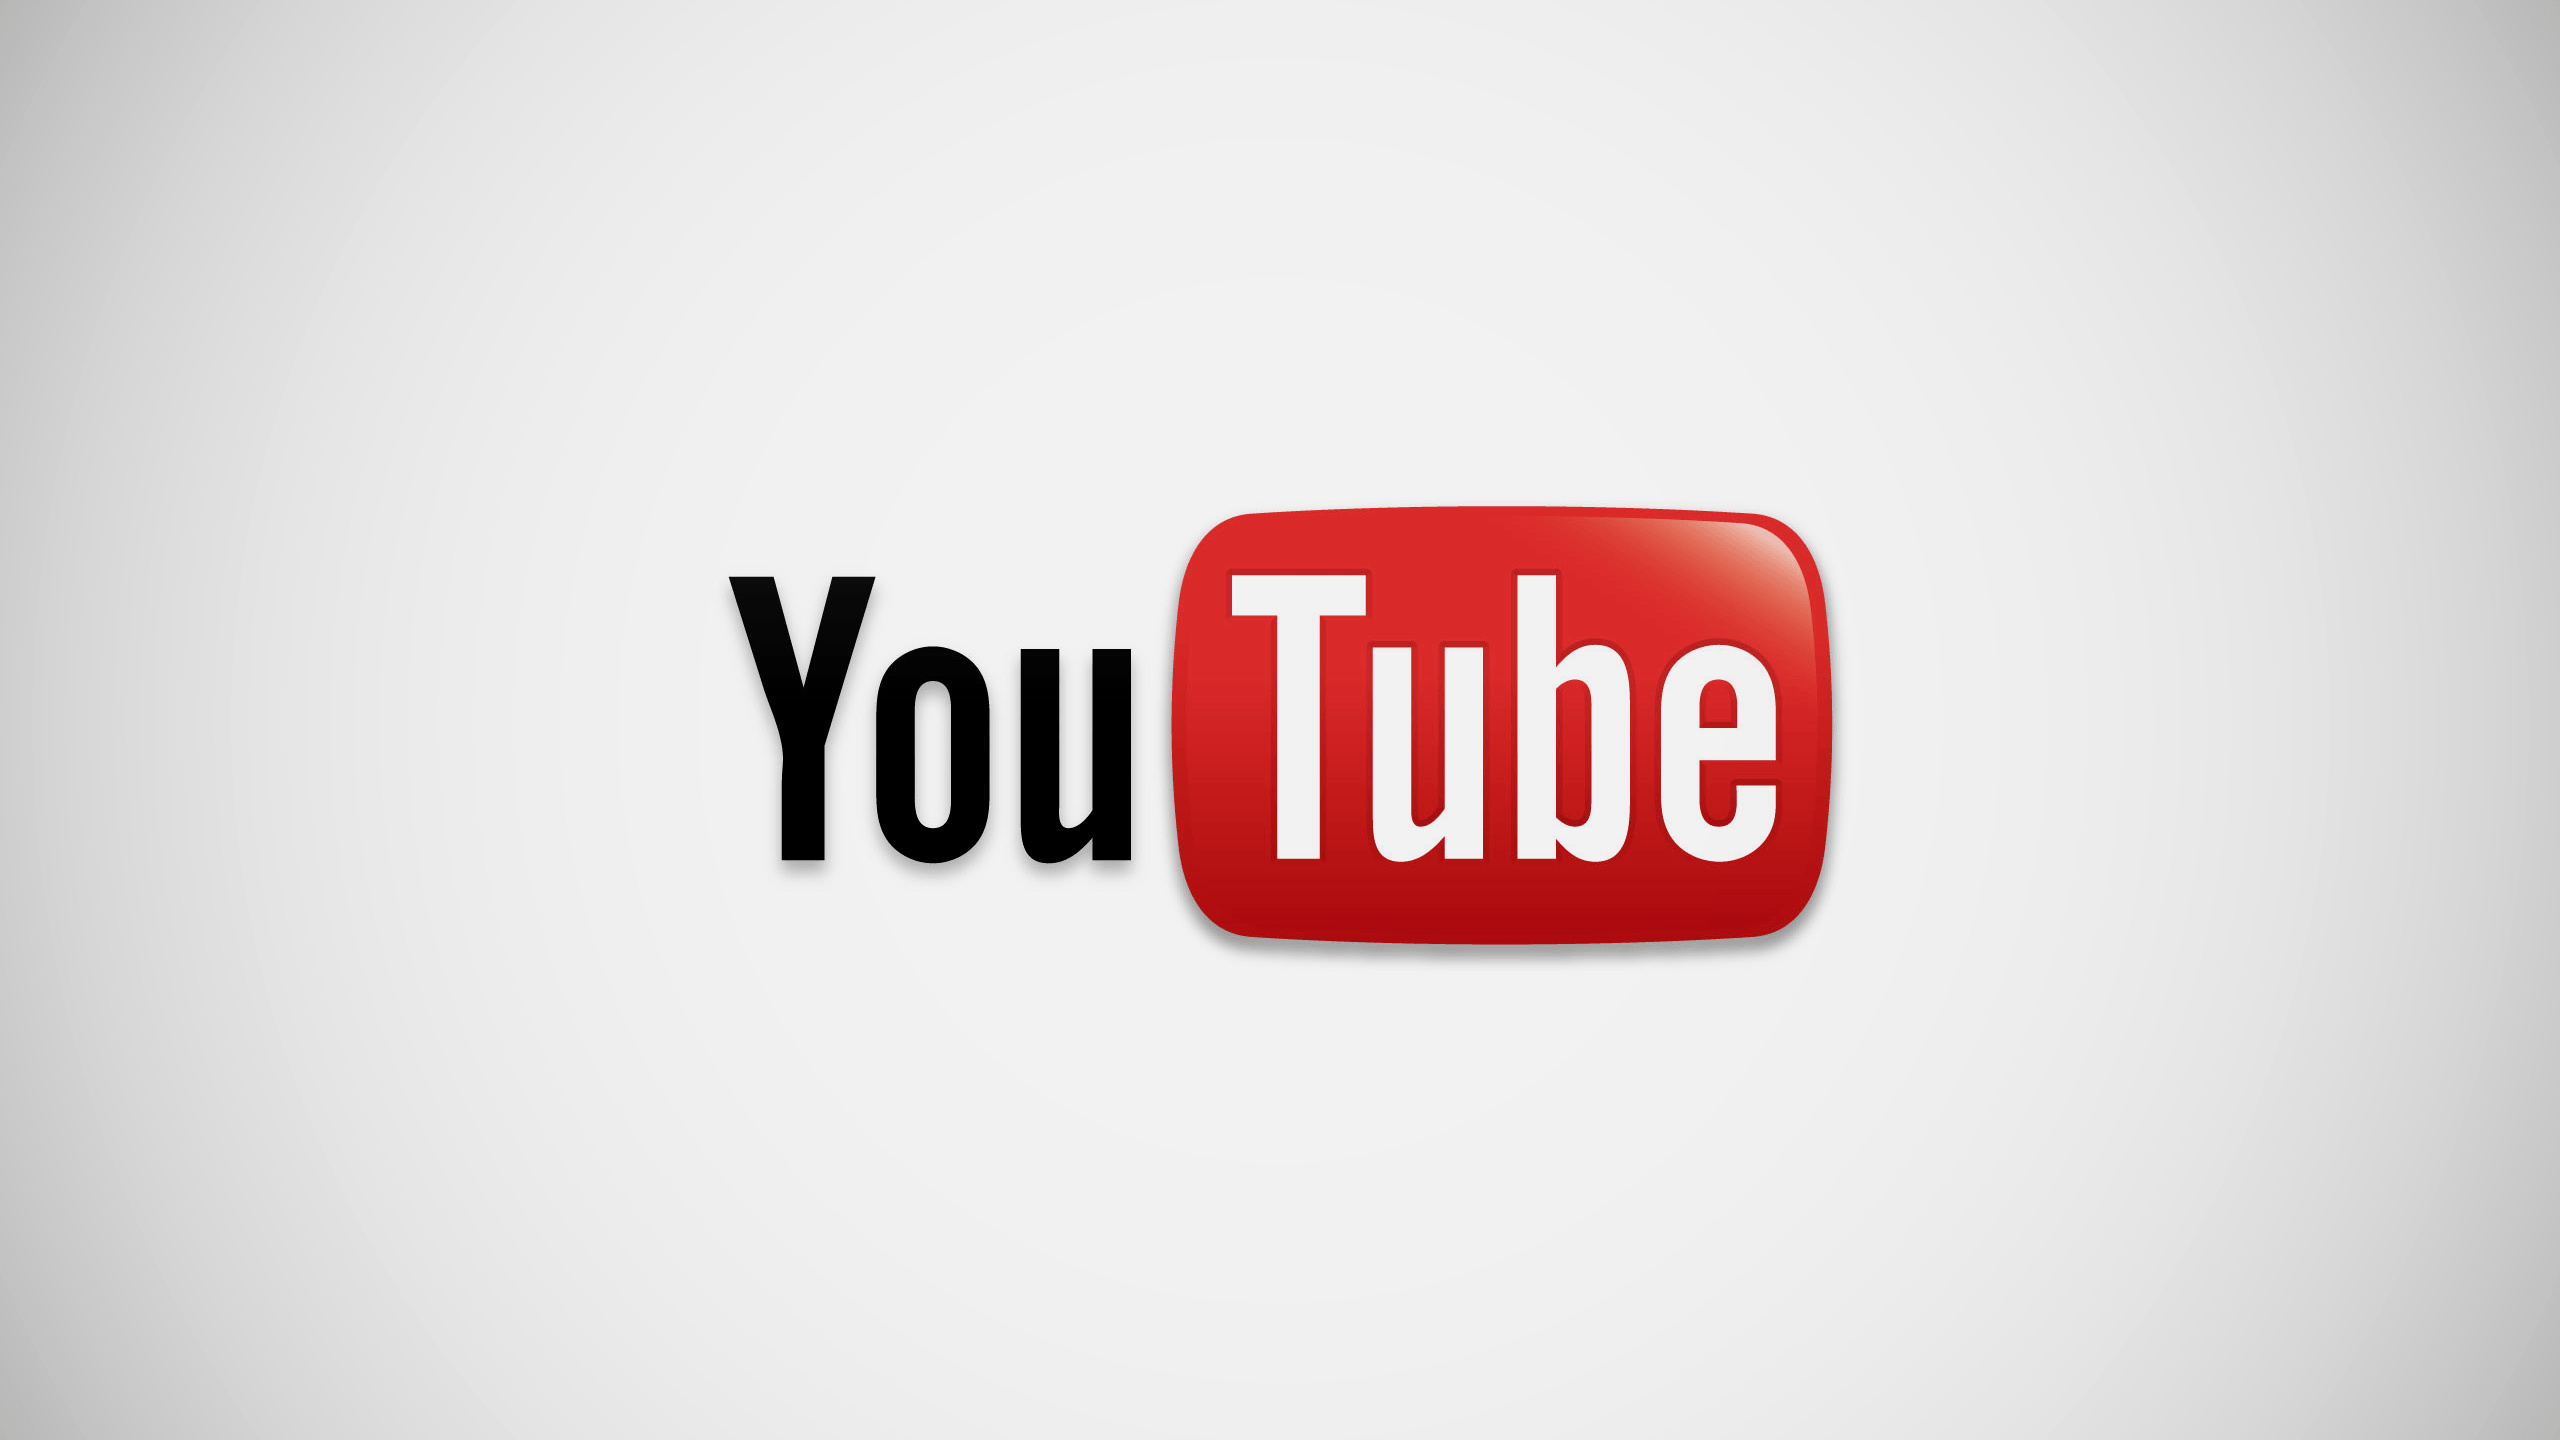 YouTube: 2005-2011 logo version, Split into two parts: the simple black “You” with the first letter capitalized, and the “Tube”. 2560x1440 HD Wallpaper.